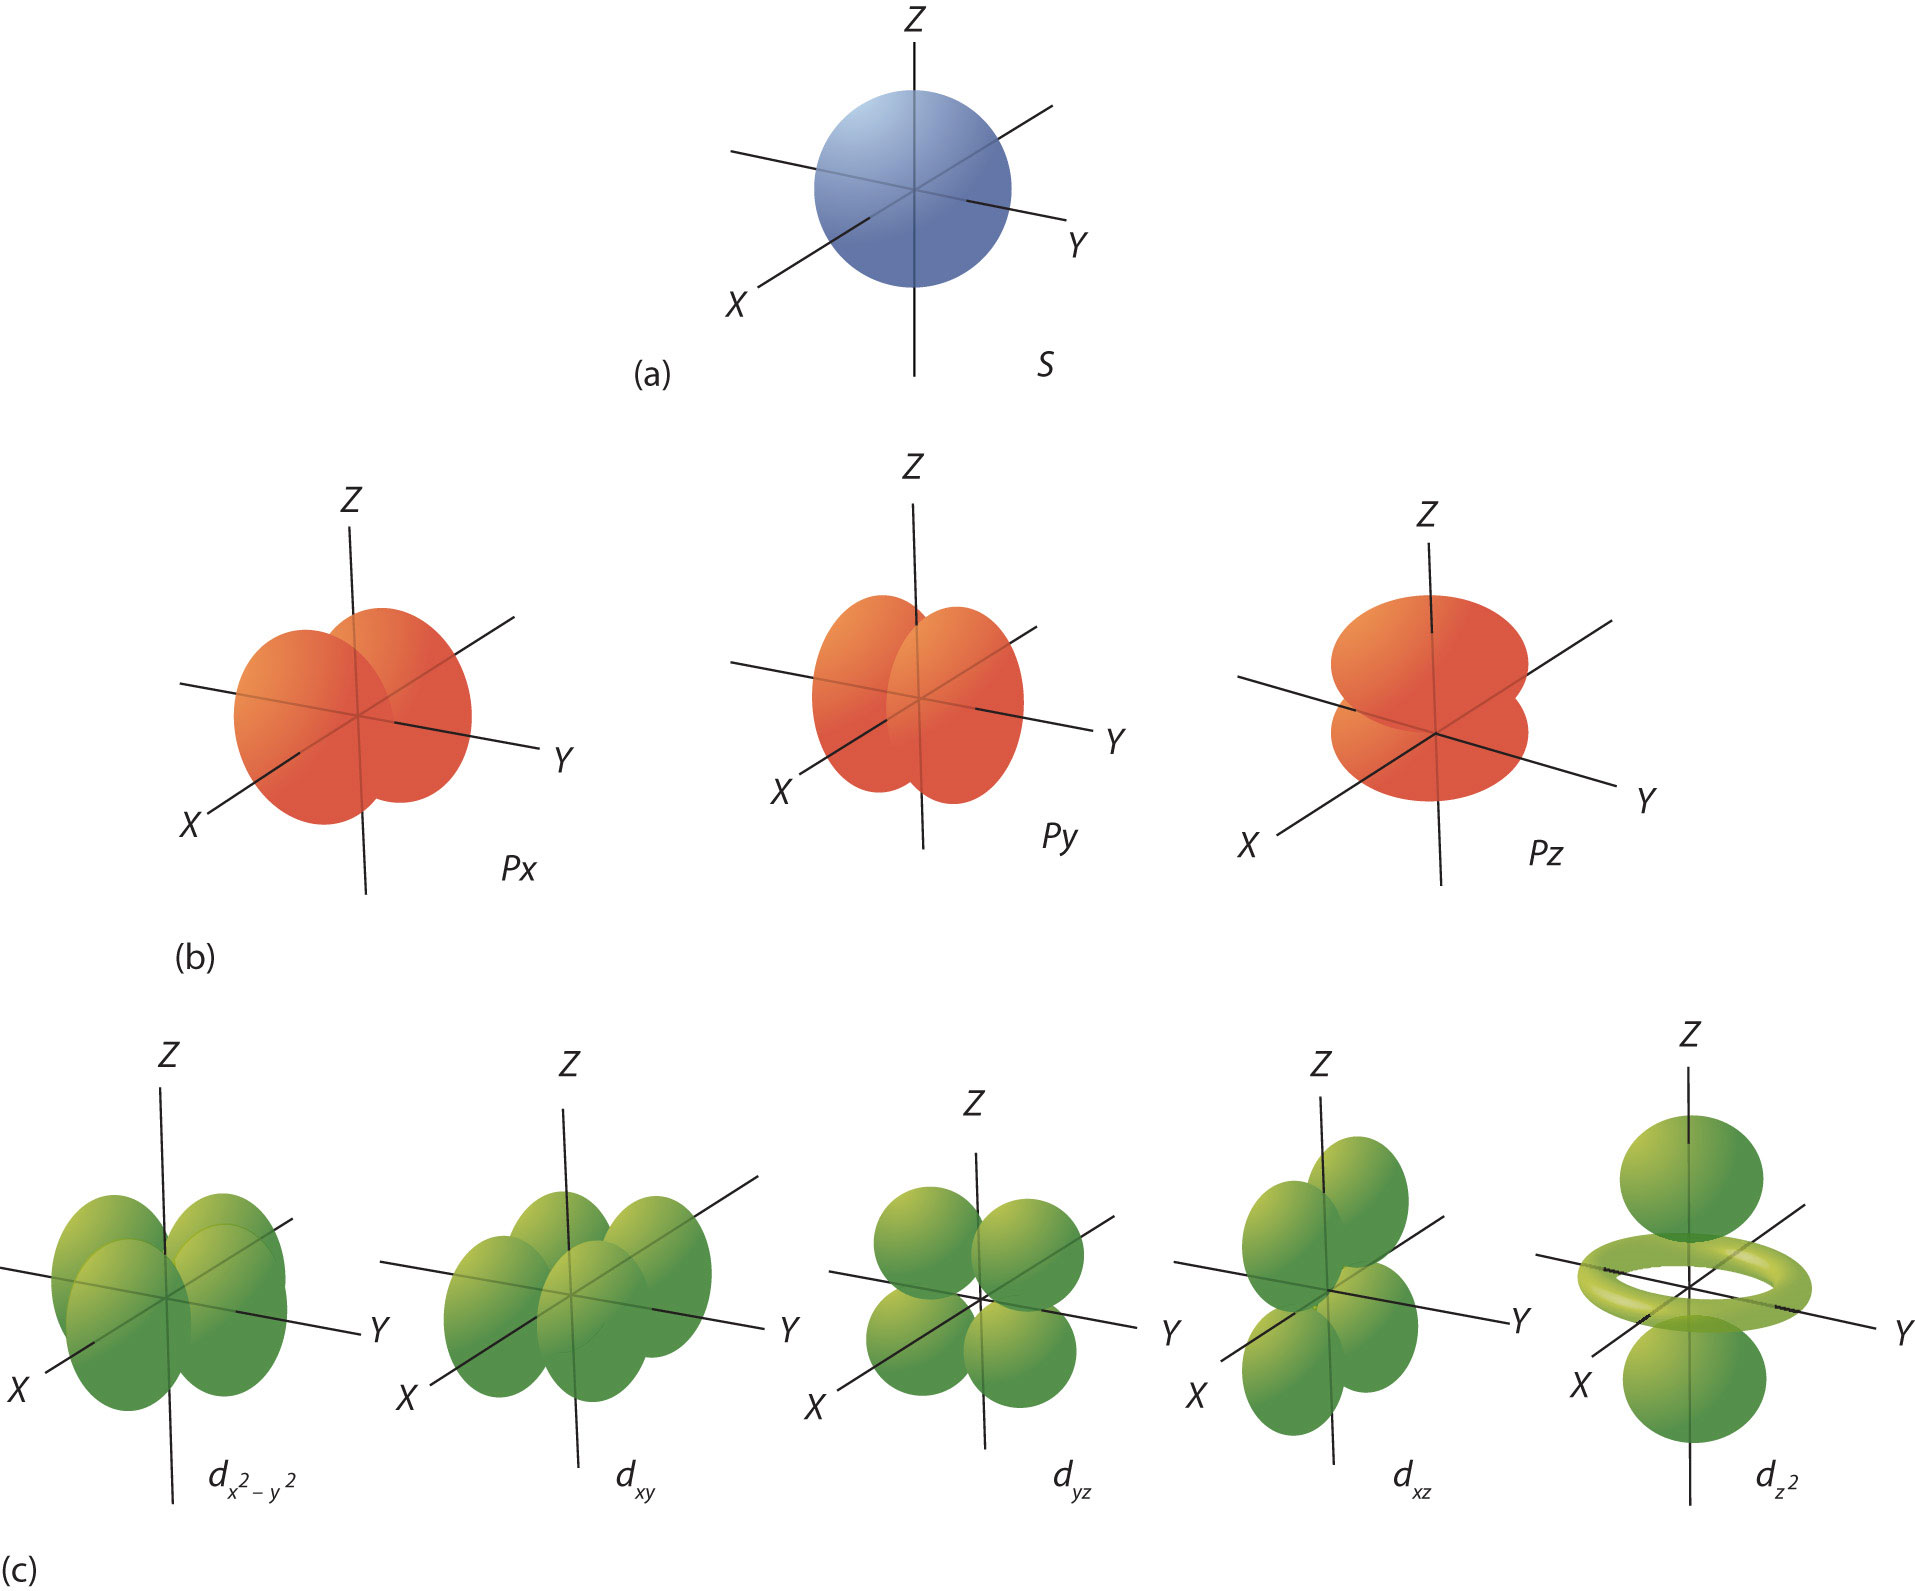 Electron orbitals. 1 blue, 3 red and five green orbitals from top to bottom.